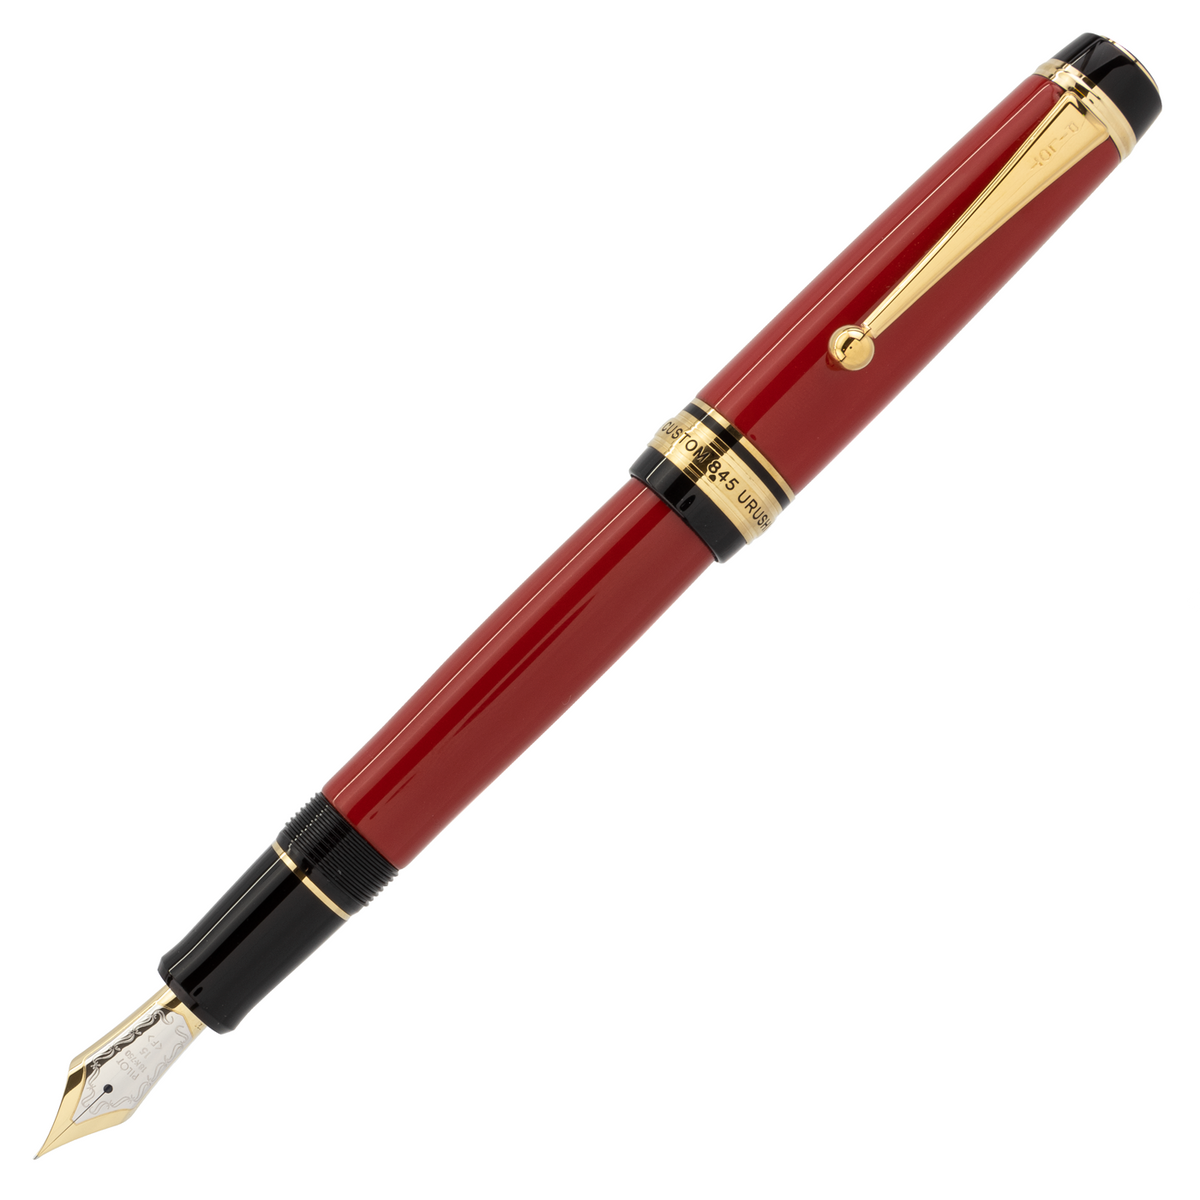  Each pen barrel in this 845 is skillfully lacquered, cured, and polished three times to create an exquisite, ebonite finish, finished off with gold trim.   Two-toned, 18-karat gold/rhodium Fine/Medium Nib.  Nib #15 Uses Pilot cartridges or included CON-70 converter. 1.5 ounce weight. 6" capped, 5.5" uncapped, posting is not recommended.